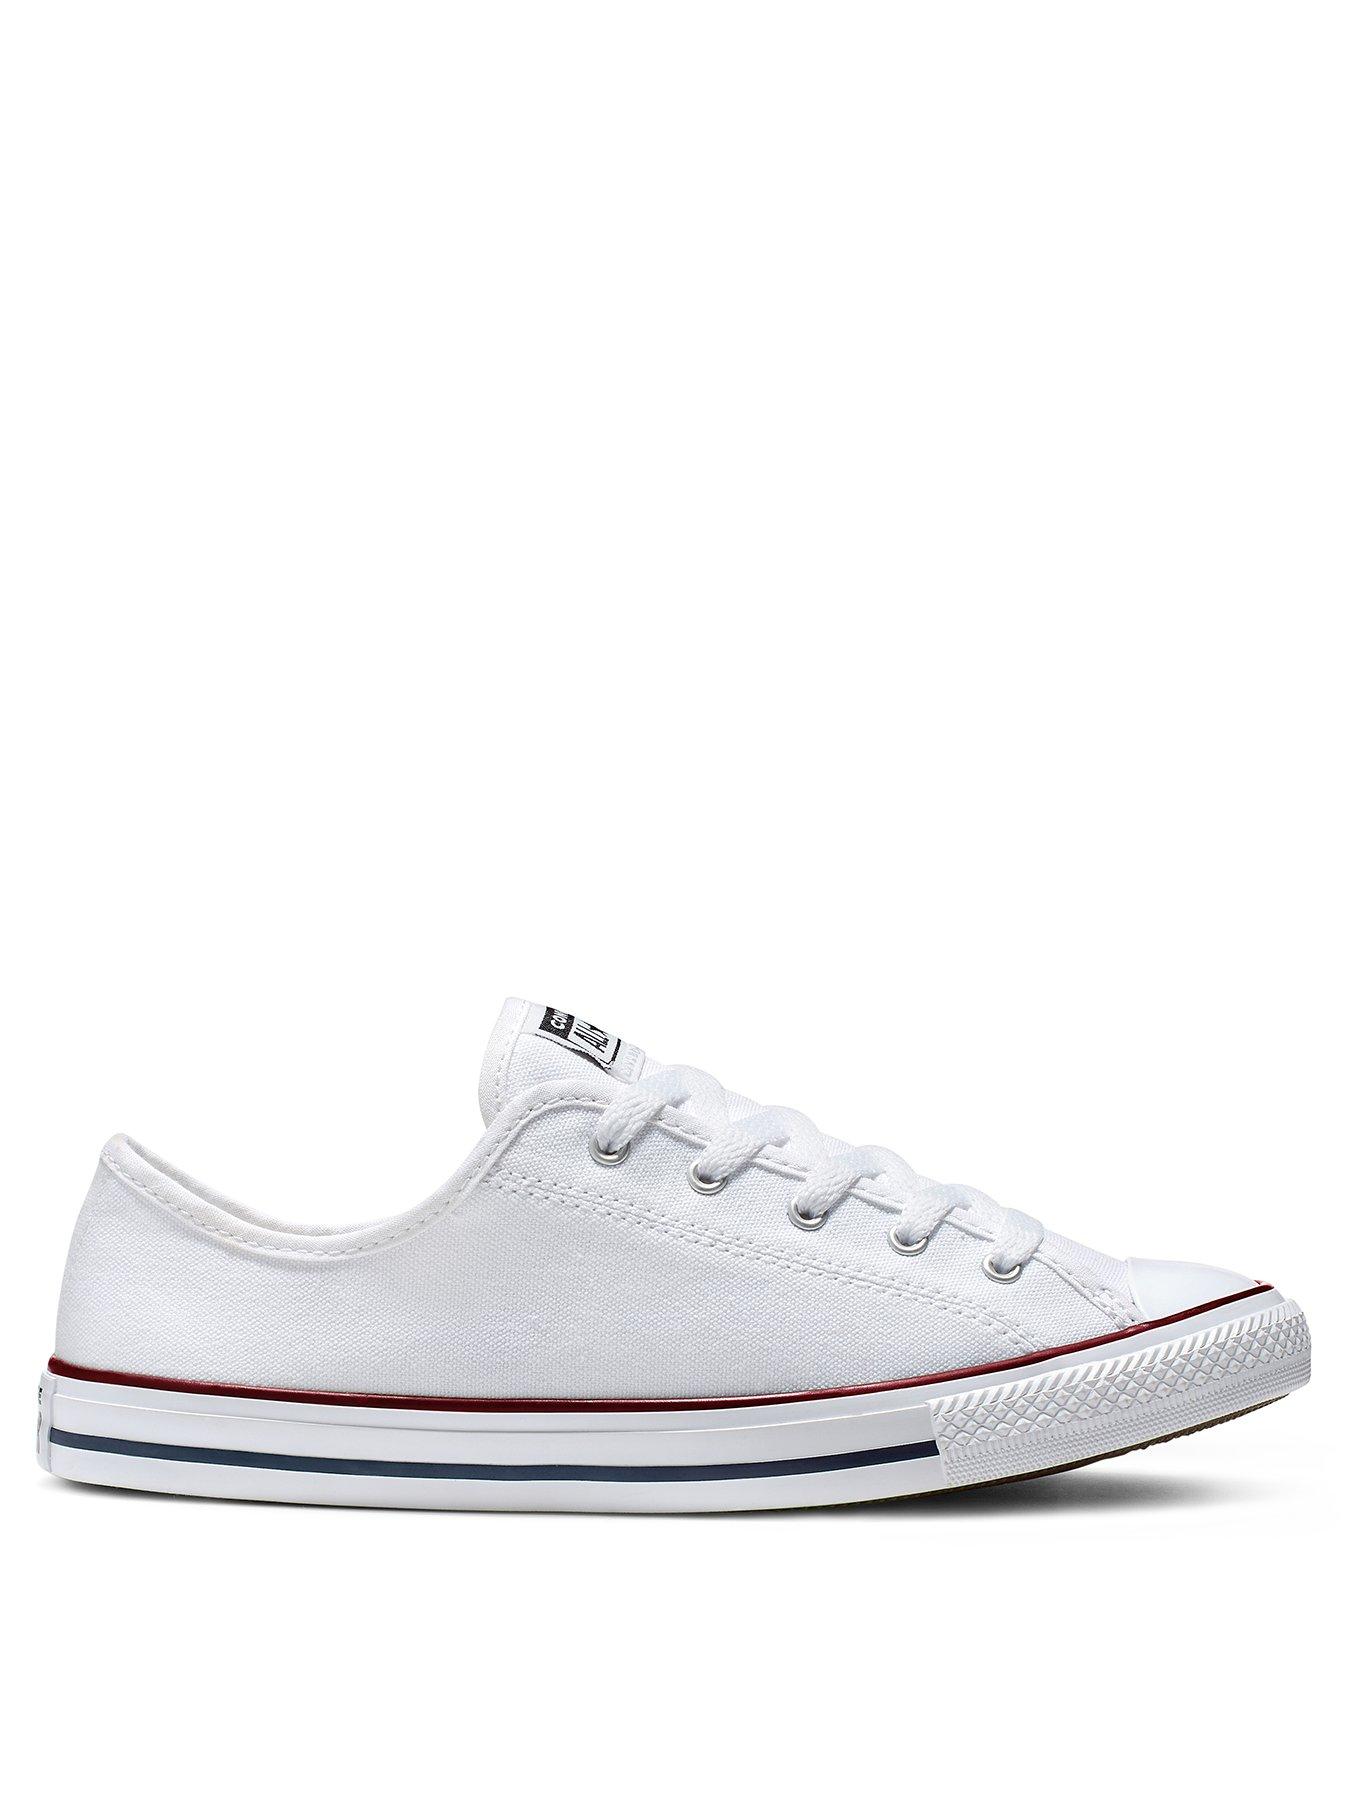 converse chuck taylor all star dainty ox shoes